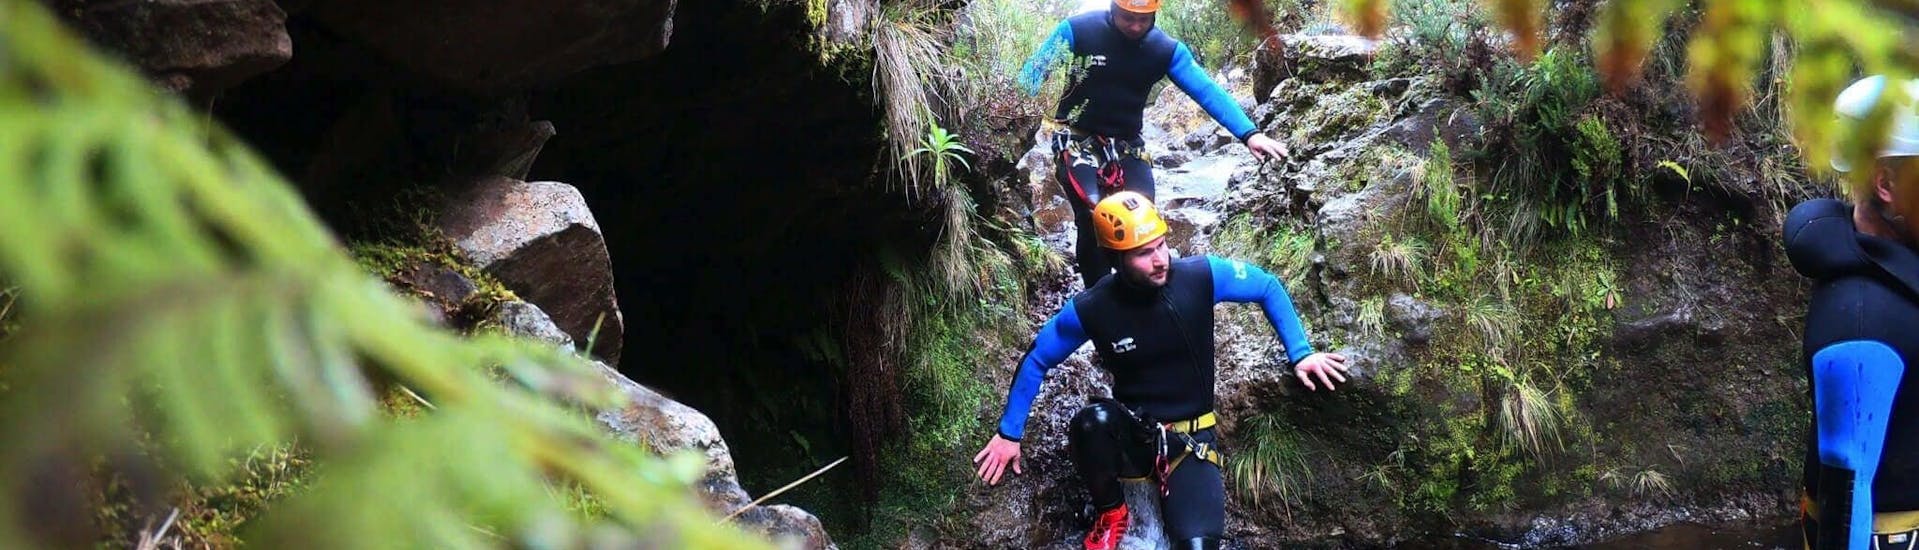 People canyoning in Ribeira das Cales with Adventure Kingdom.